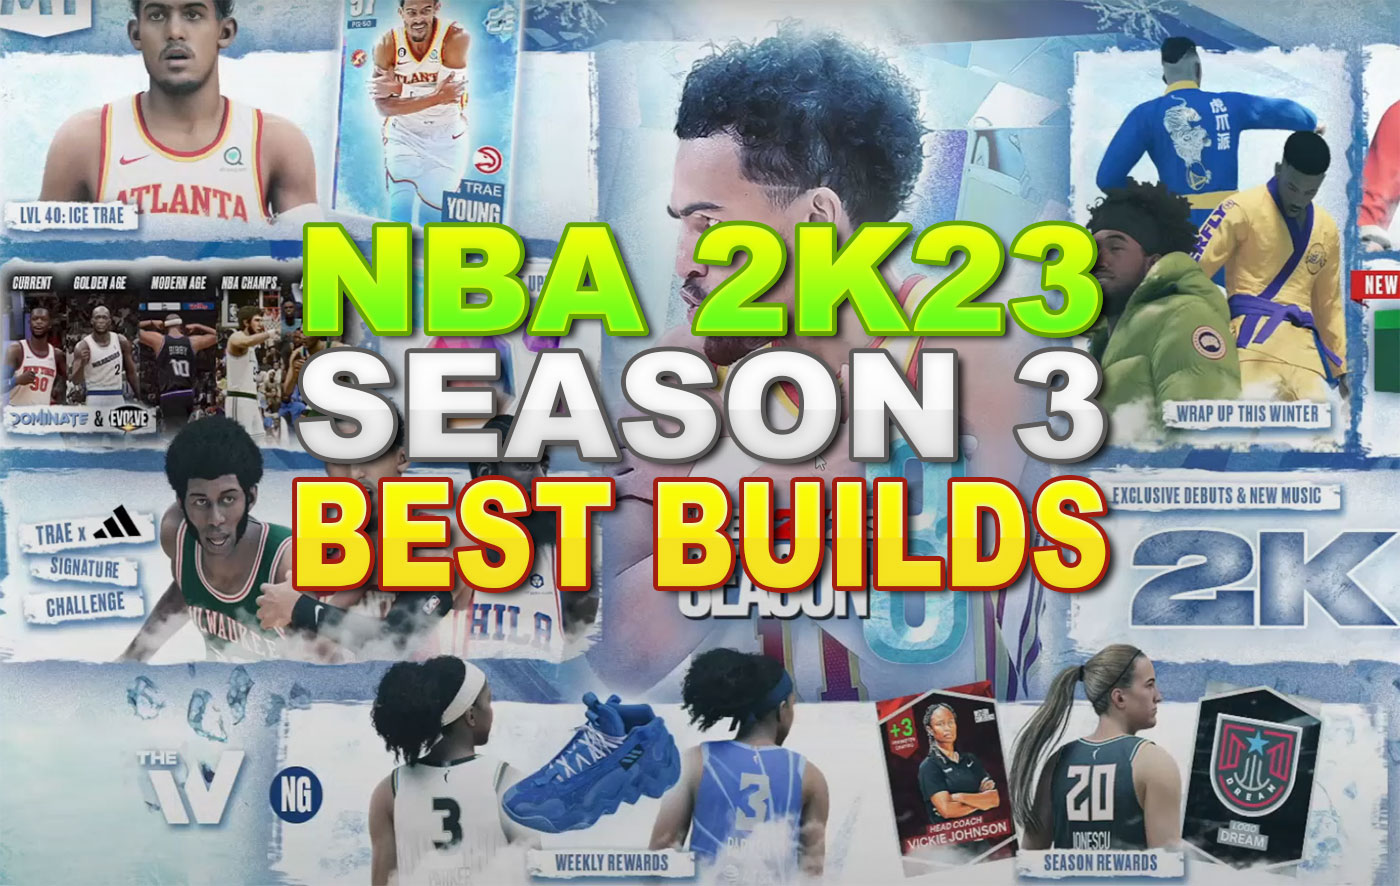 Top 10 NBA 2K23 Season 3 Best Builds For PG, SG, SF, PF, C Positions (Next & Current Gen)